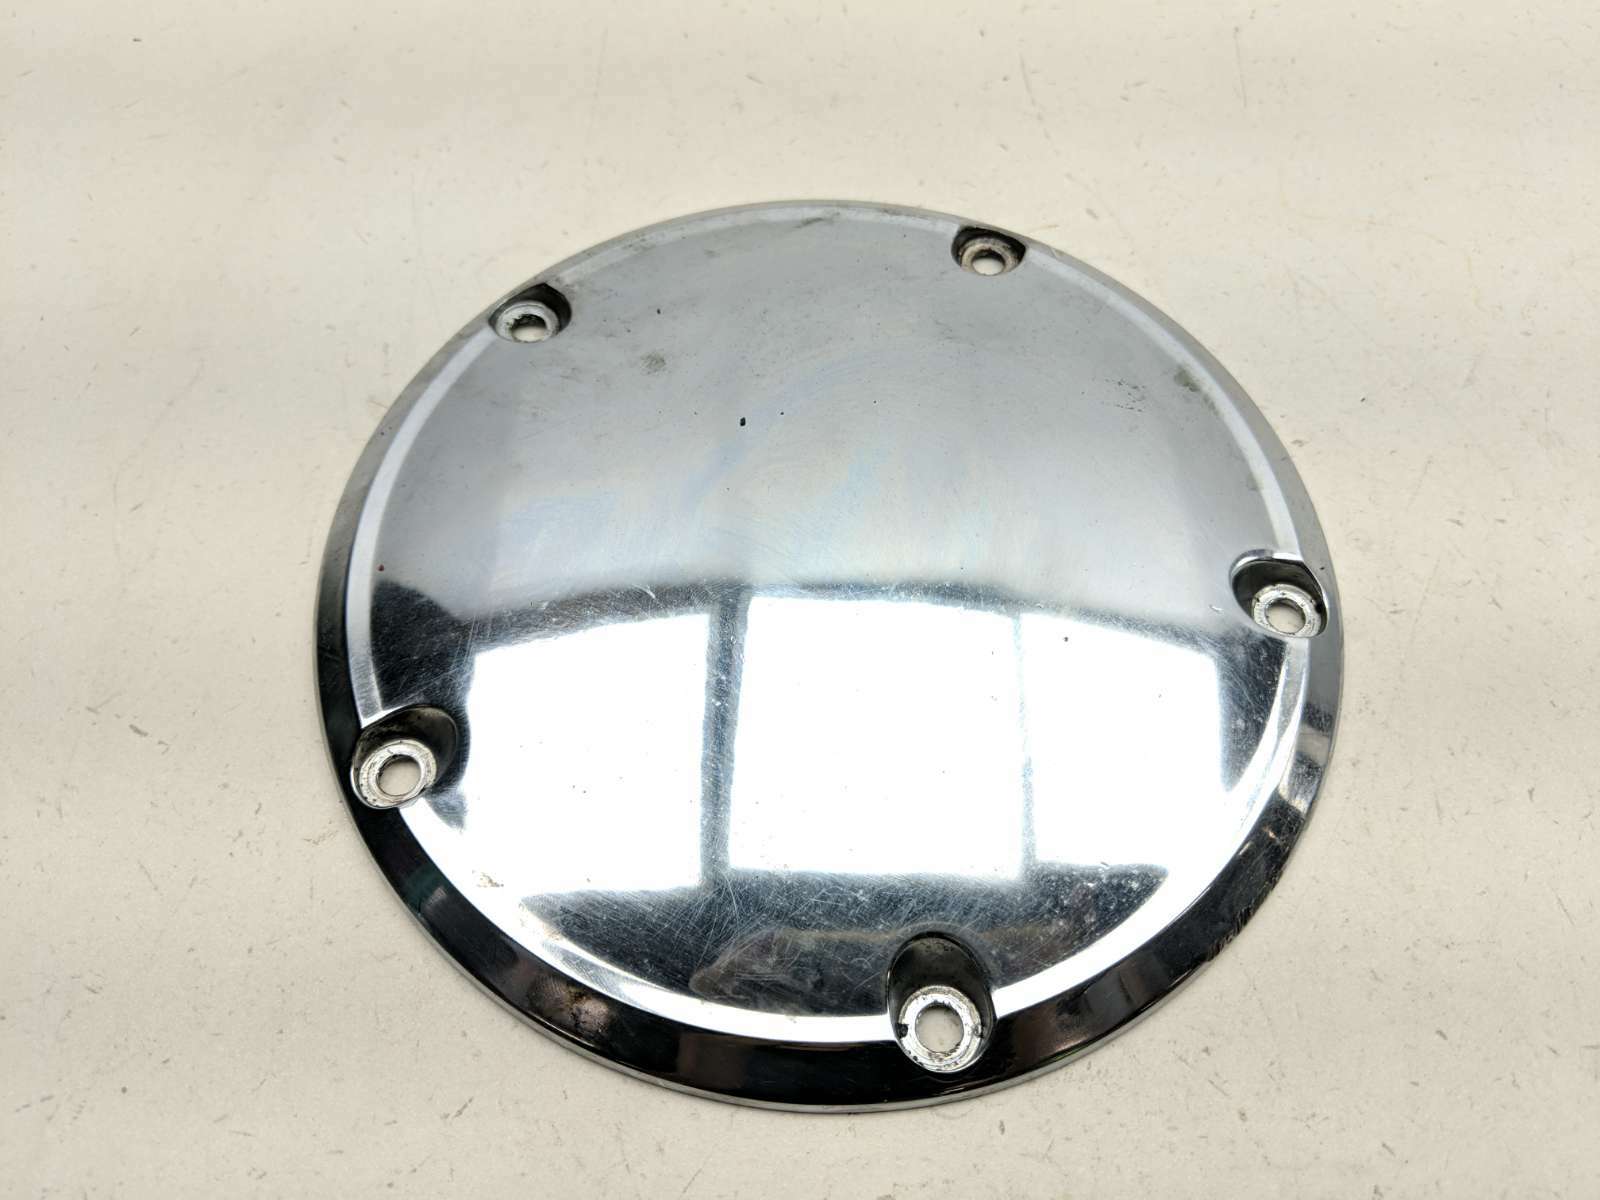 02 Harley Ultra Classic Electra Glide FLHTCUI Engine Motor Derby Cover Panel 25415-99